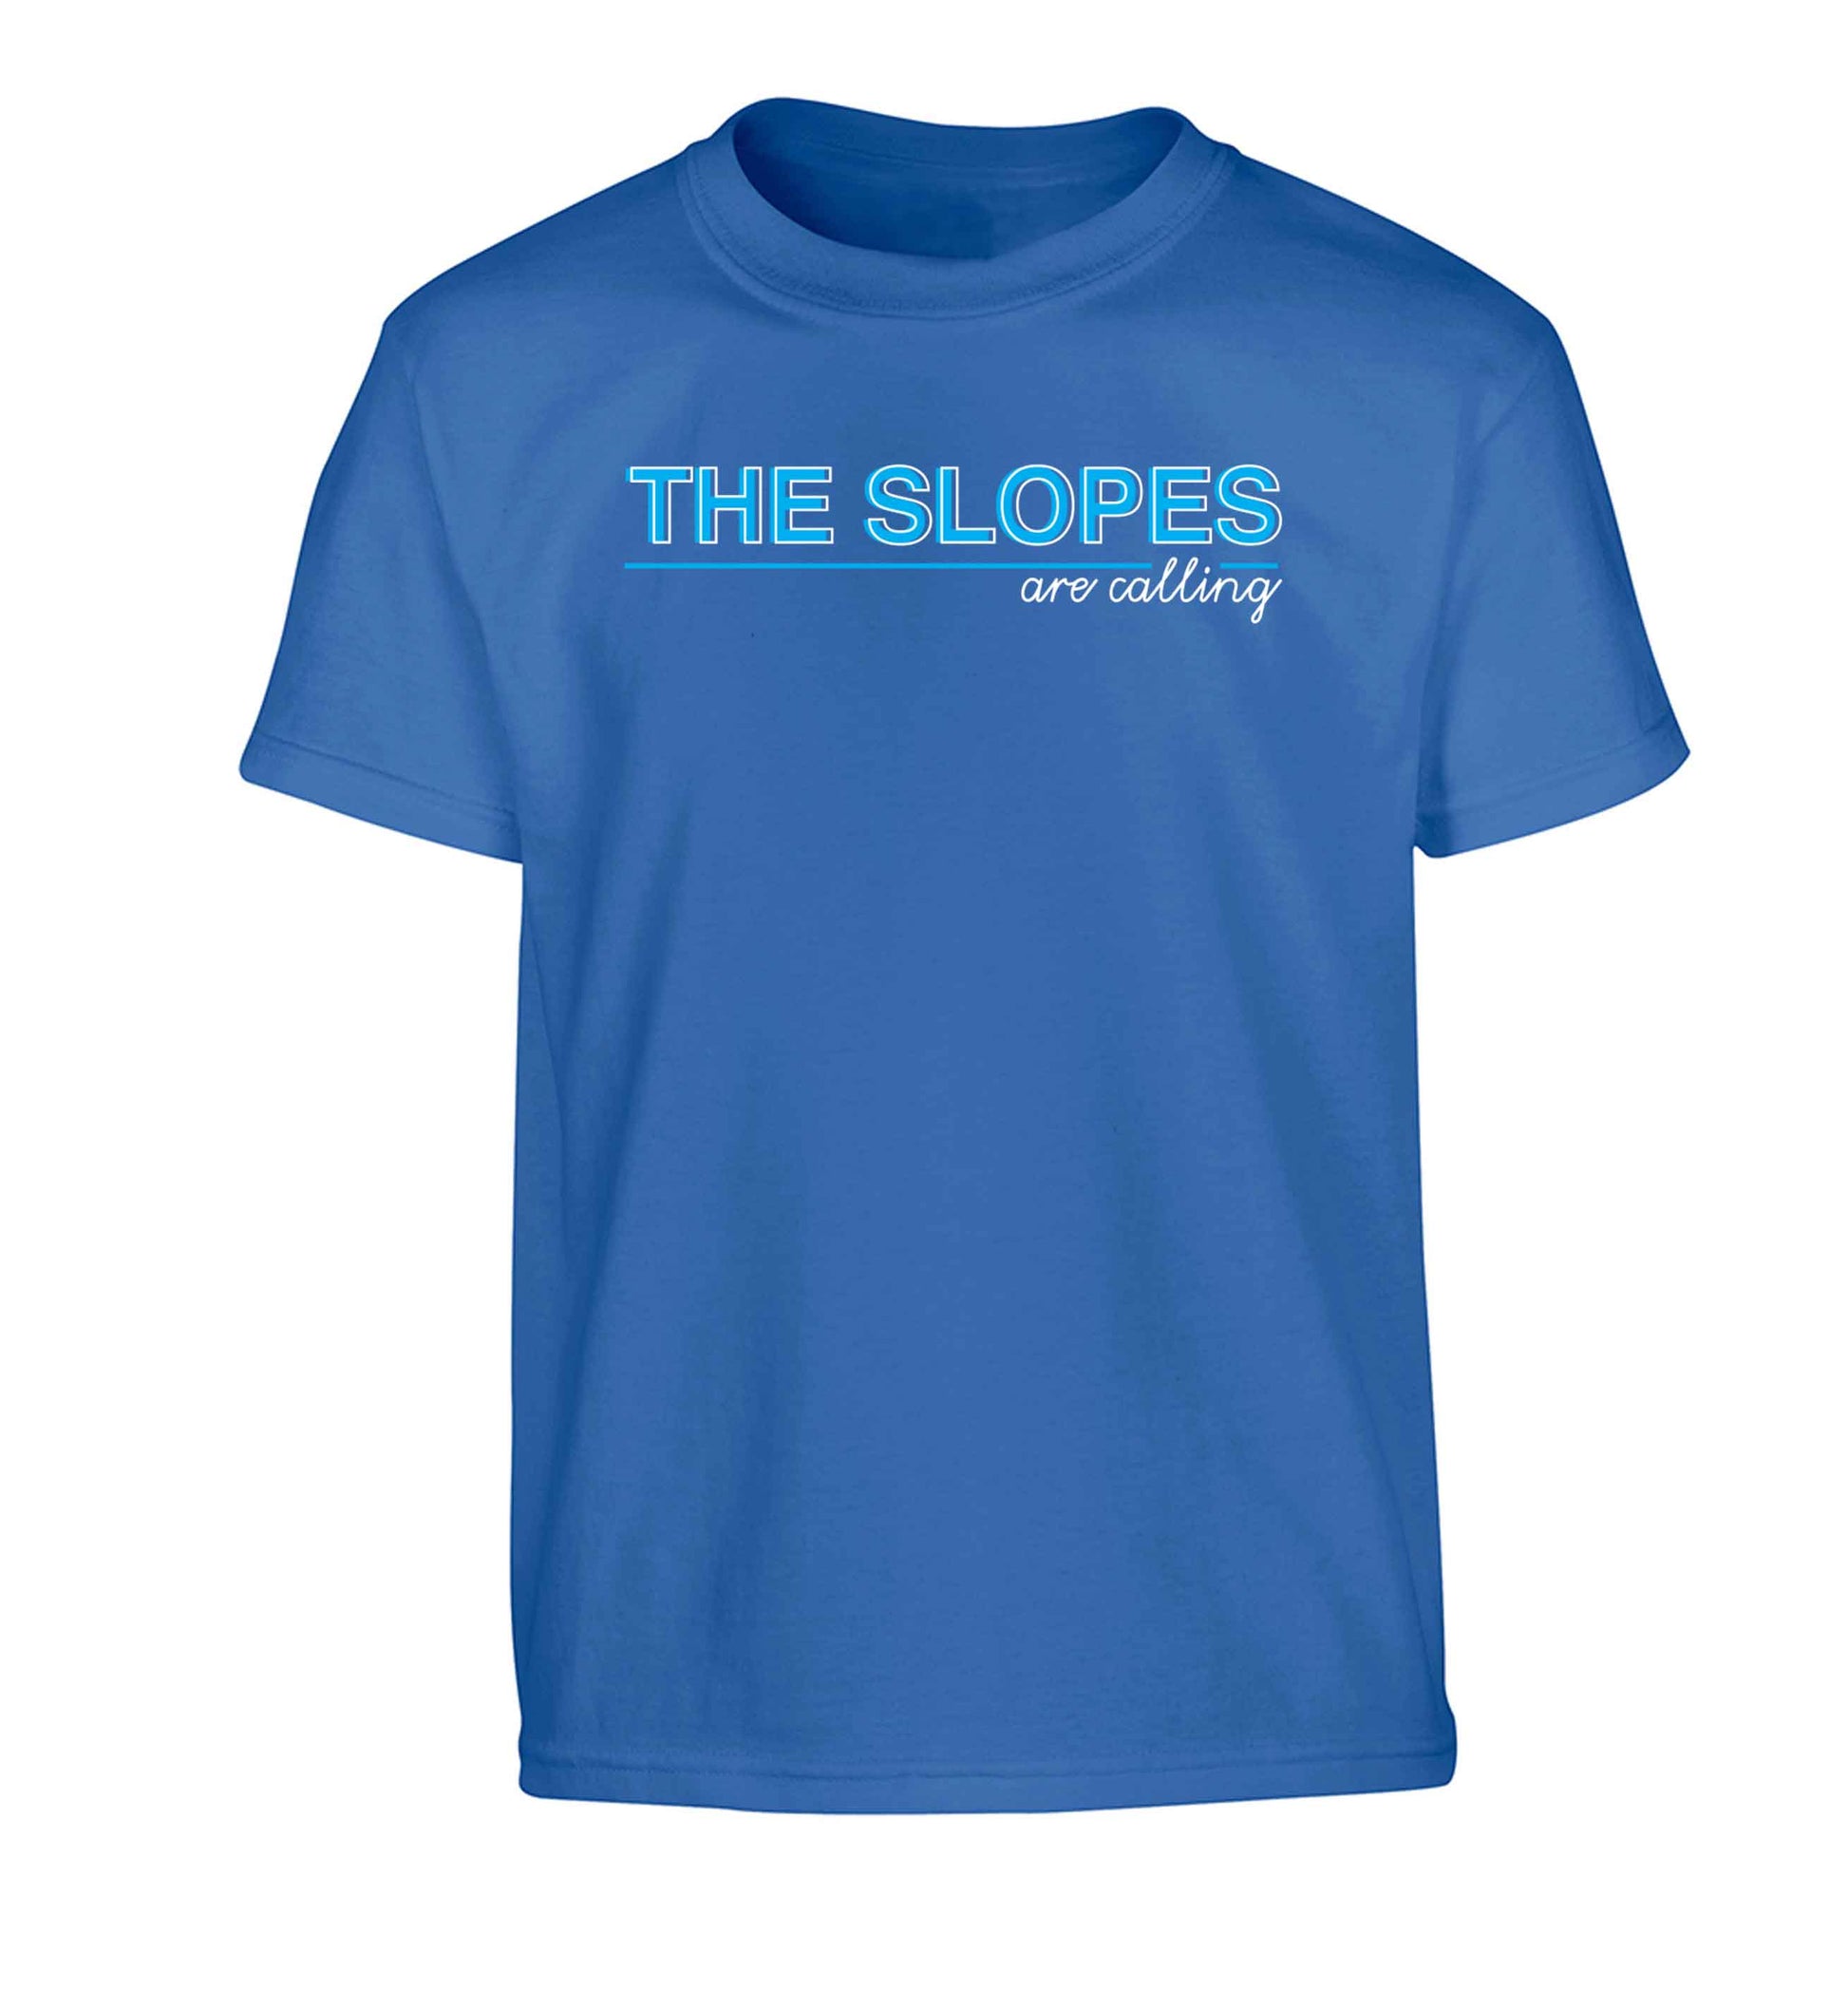 The slopes are calling Children's blue Tshirt 12-13 Years